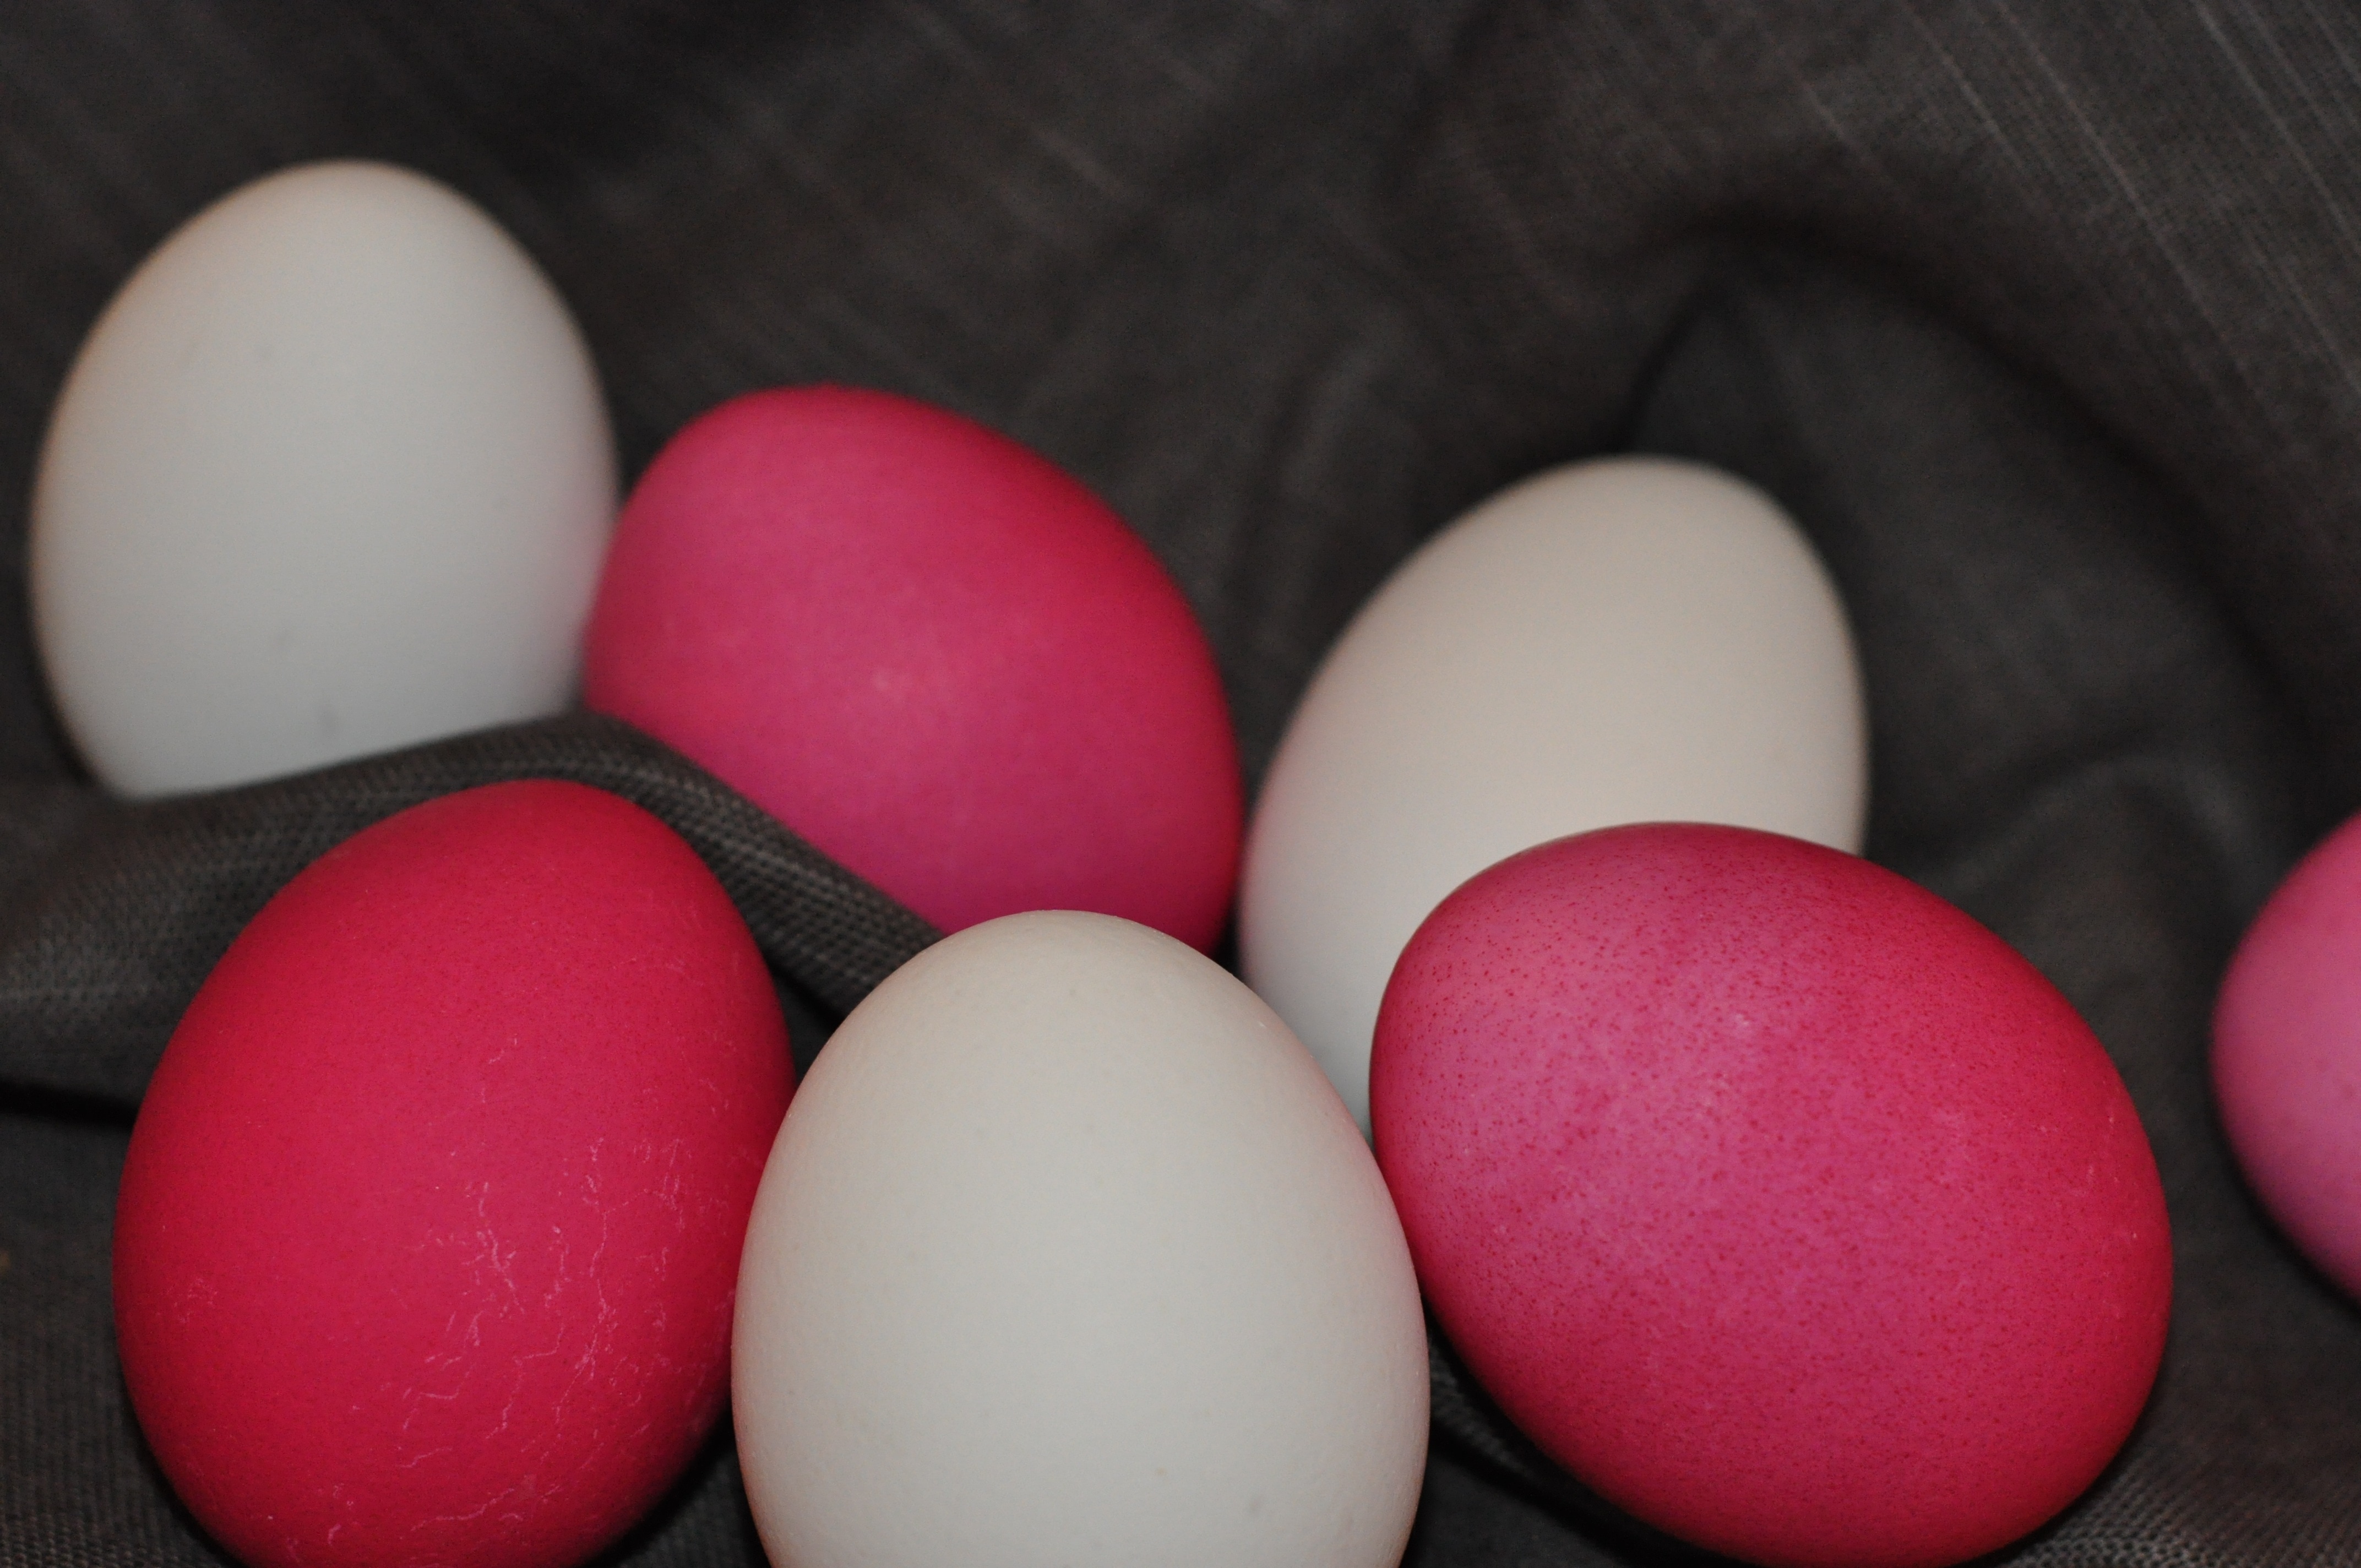 7 red and white raw eggs